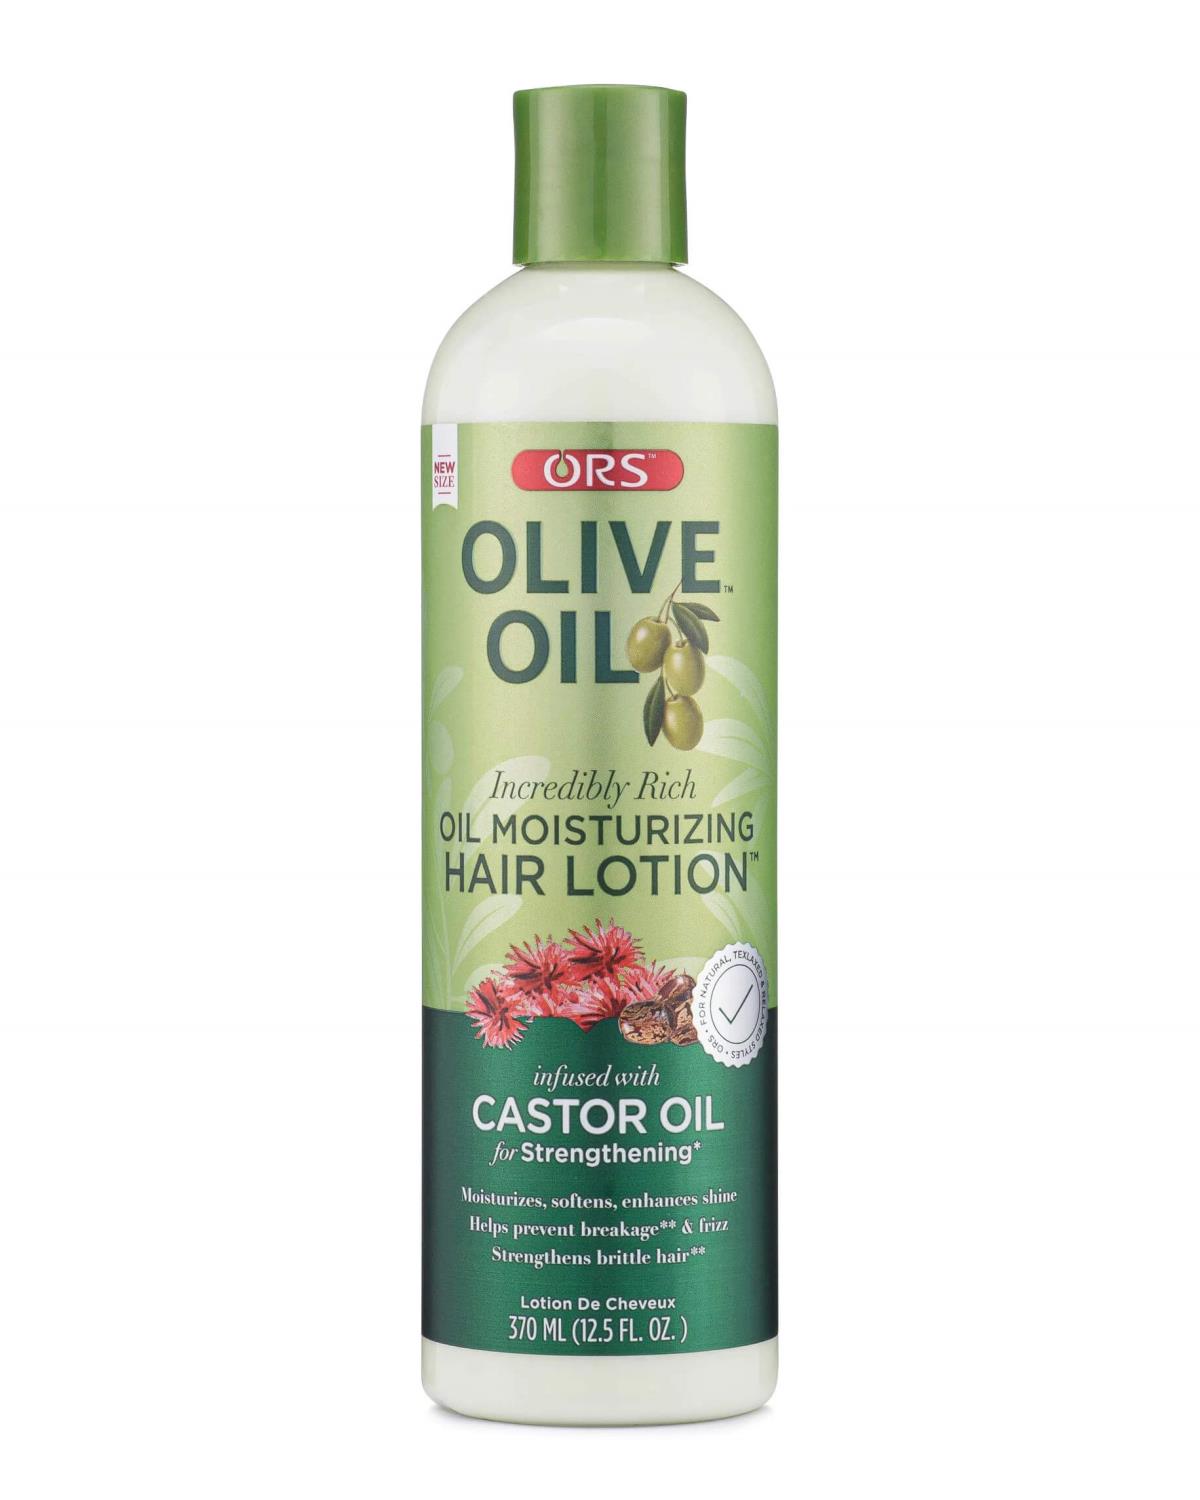 ORS Olive Oil Incredibly Rich Oil Moisturizing Hair Lotion 12.5oz